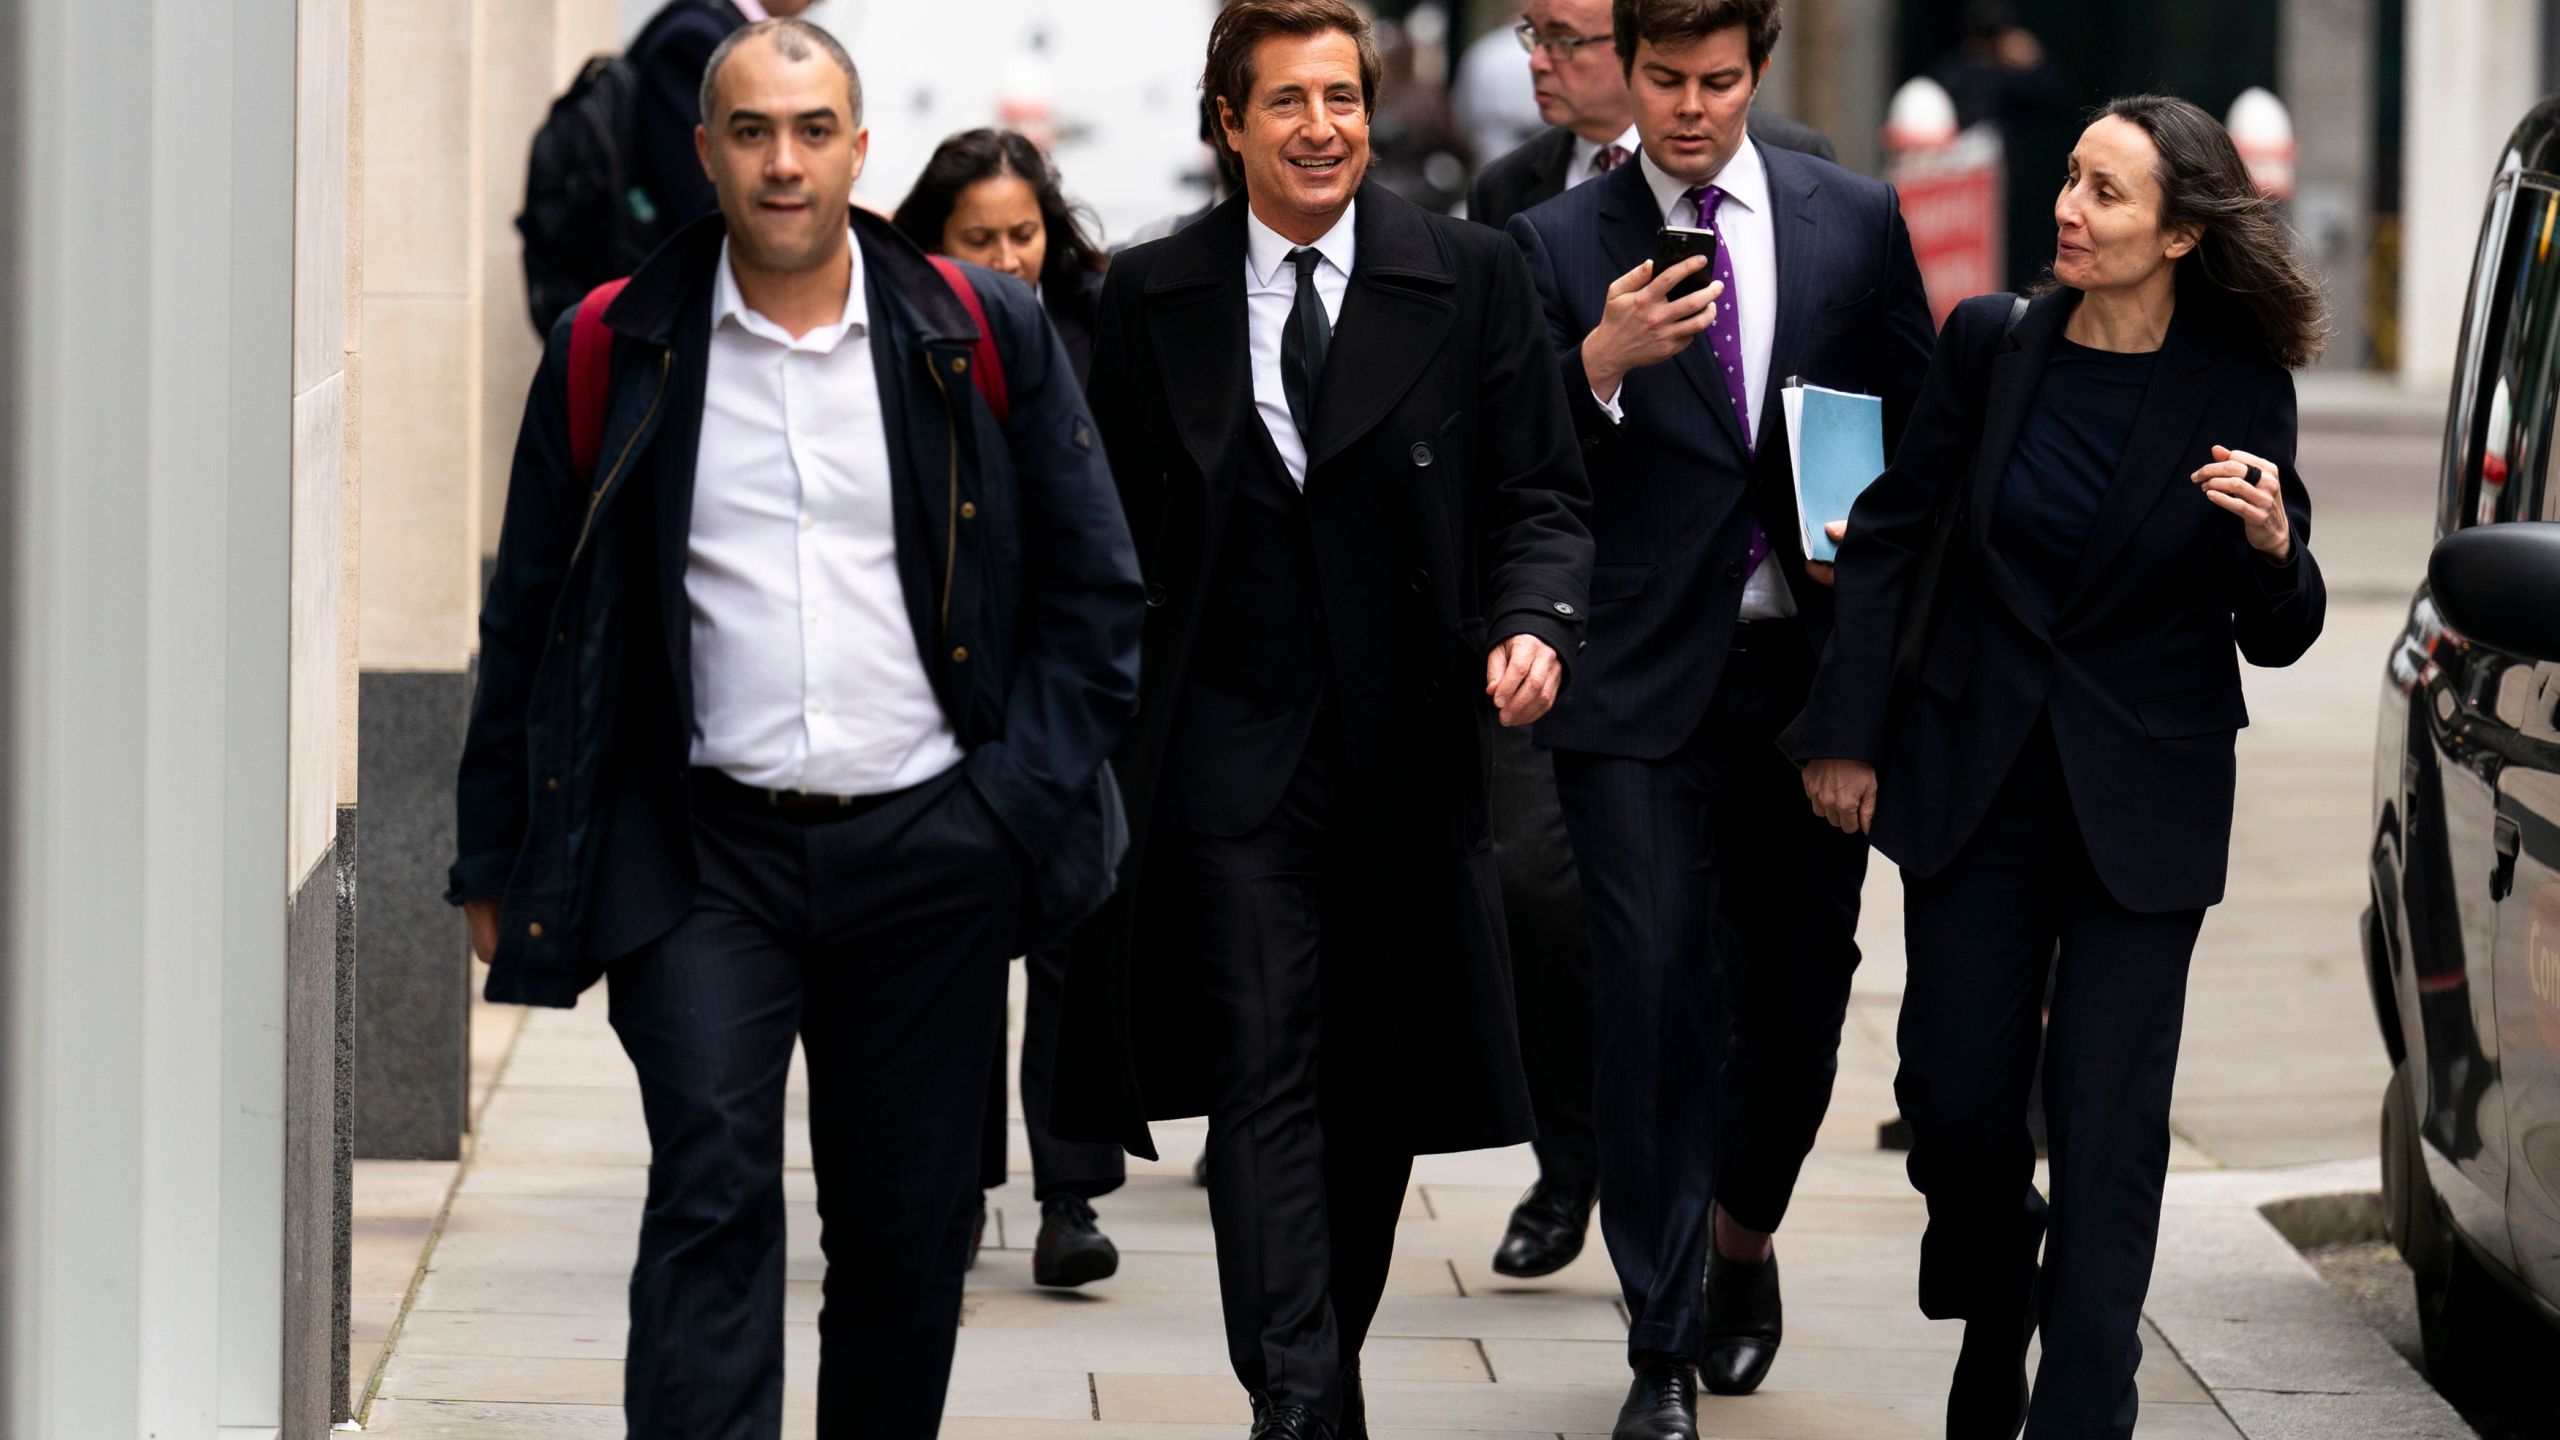 Attorney David Sherborne, second from left, at the Rolls Buildings, central London, Wednesday March 20, 2024. Britain's Prince Harry's lawyer says the cover-up of unlawful information gathering at British tabloids owned by Rupert Murdoch went all the way to the top. Attorney David Sherborne said Wednesday in the High Court that Murdoch was among the executives at News Group Newspapers aware of skullduggery carried out by journalists and private investigators working for the now-defunct News of the World, and The Sun. (Jordan Pettitt/PA via AP)